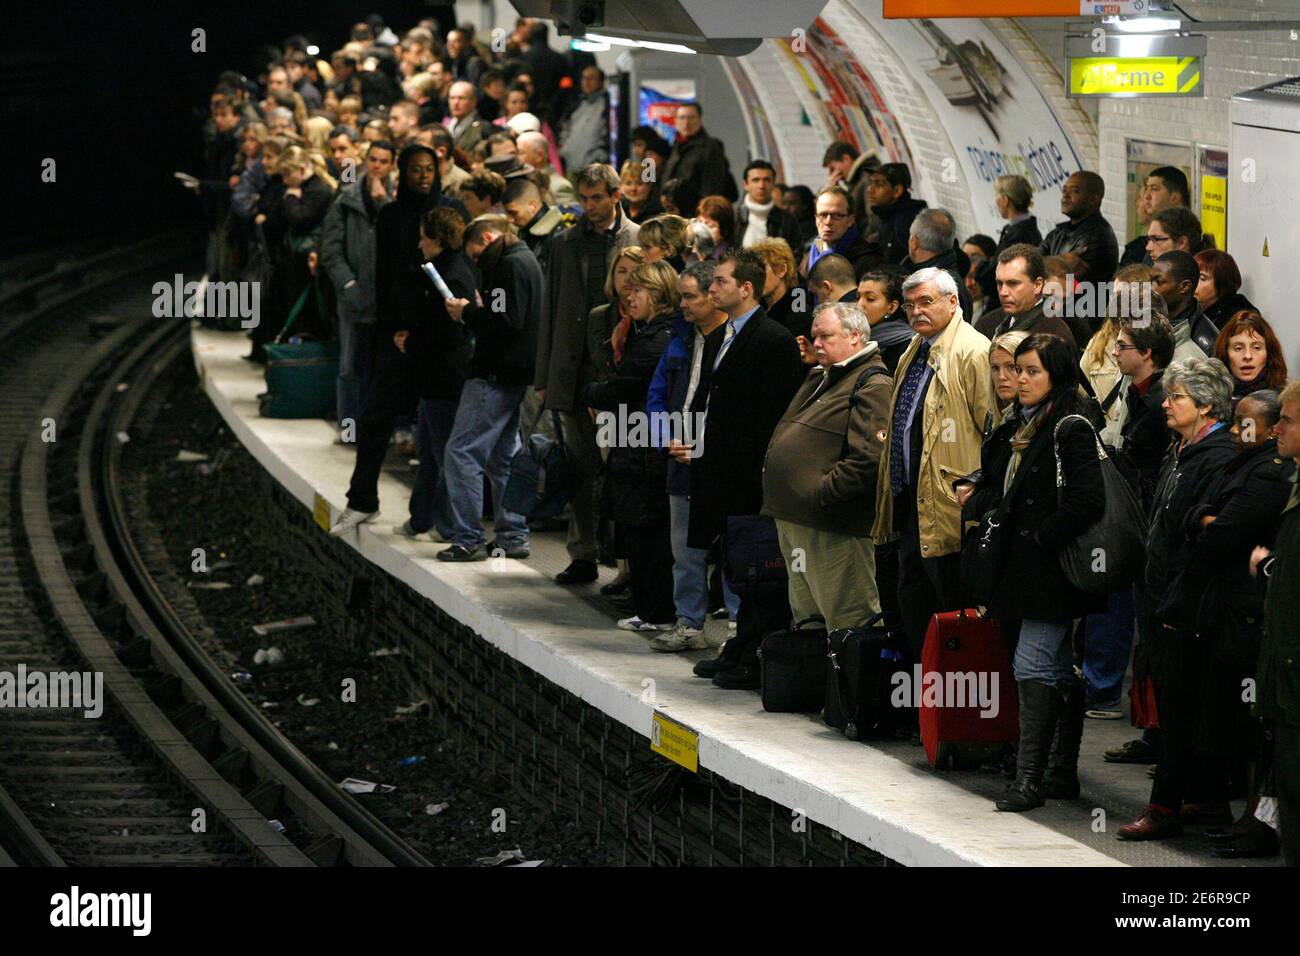 Commuters wait for a metro at Gare de l'Est subway station in Paris November 22, 2007, during a nationwide strike by French transport workers to protest against a pensions reform. French commuters faced another day of transport delays on Thursday but there was growing hope that an end was in sight to a nine-day strike to protest one of President Nicolas Sarkozy's key economic reforms.      REUTERS/Benoit Tessier (FRANCE) Stock Photo